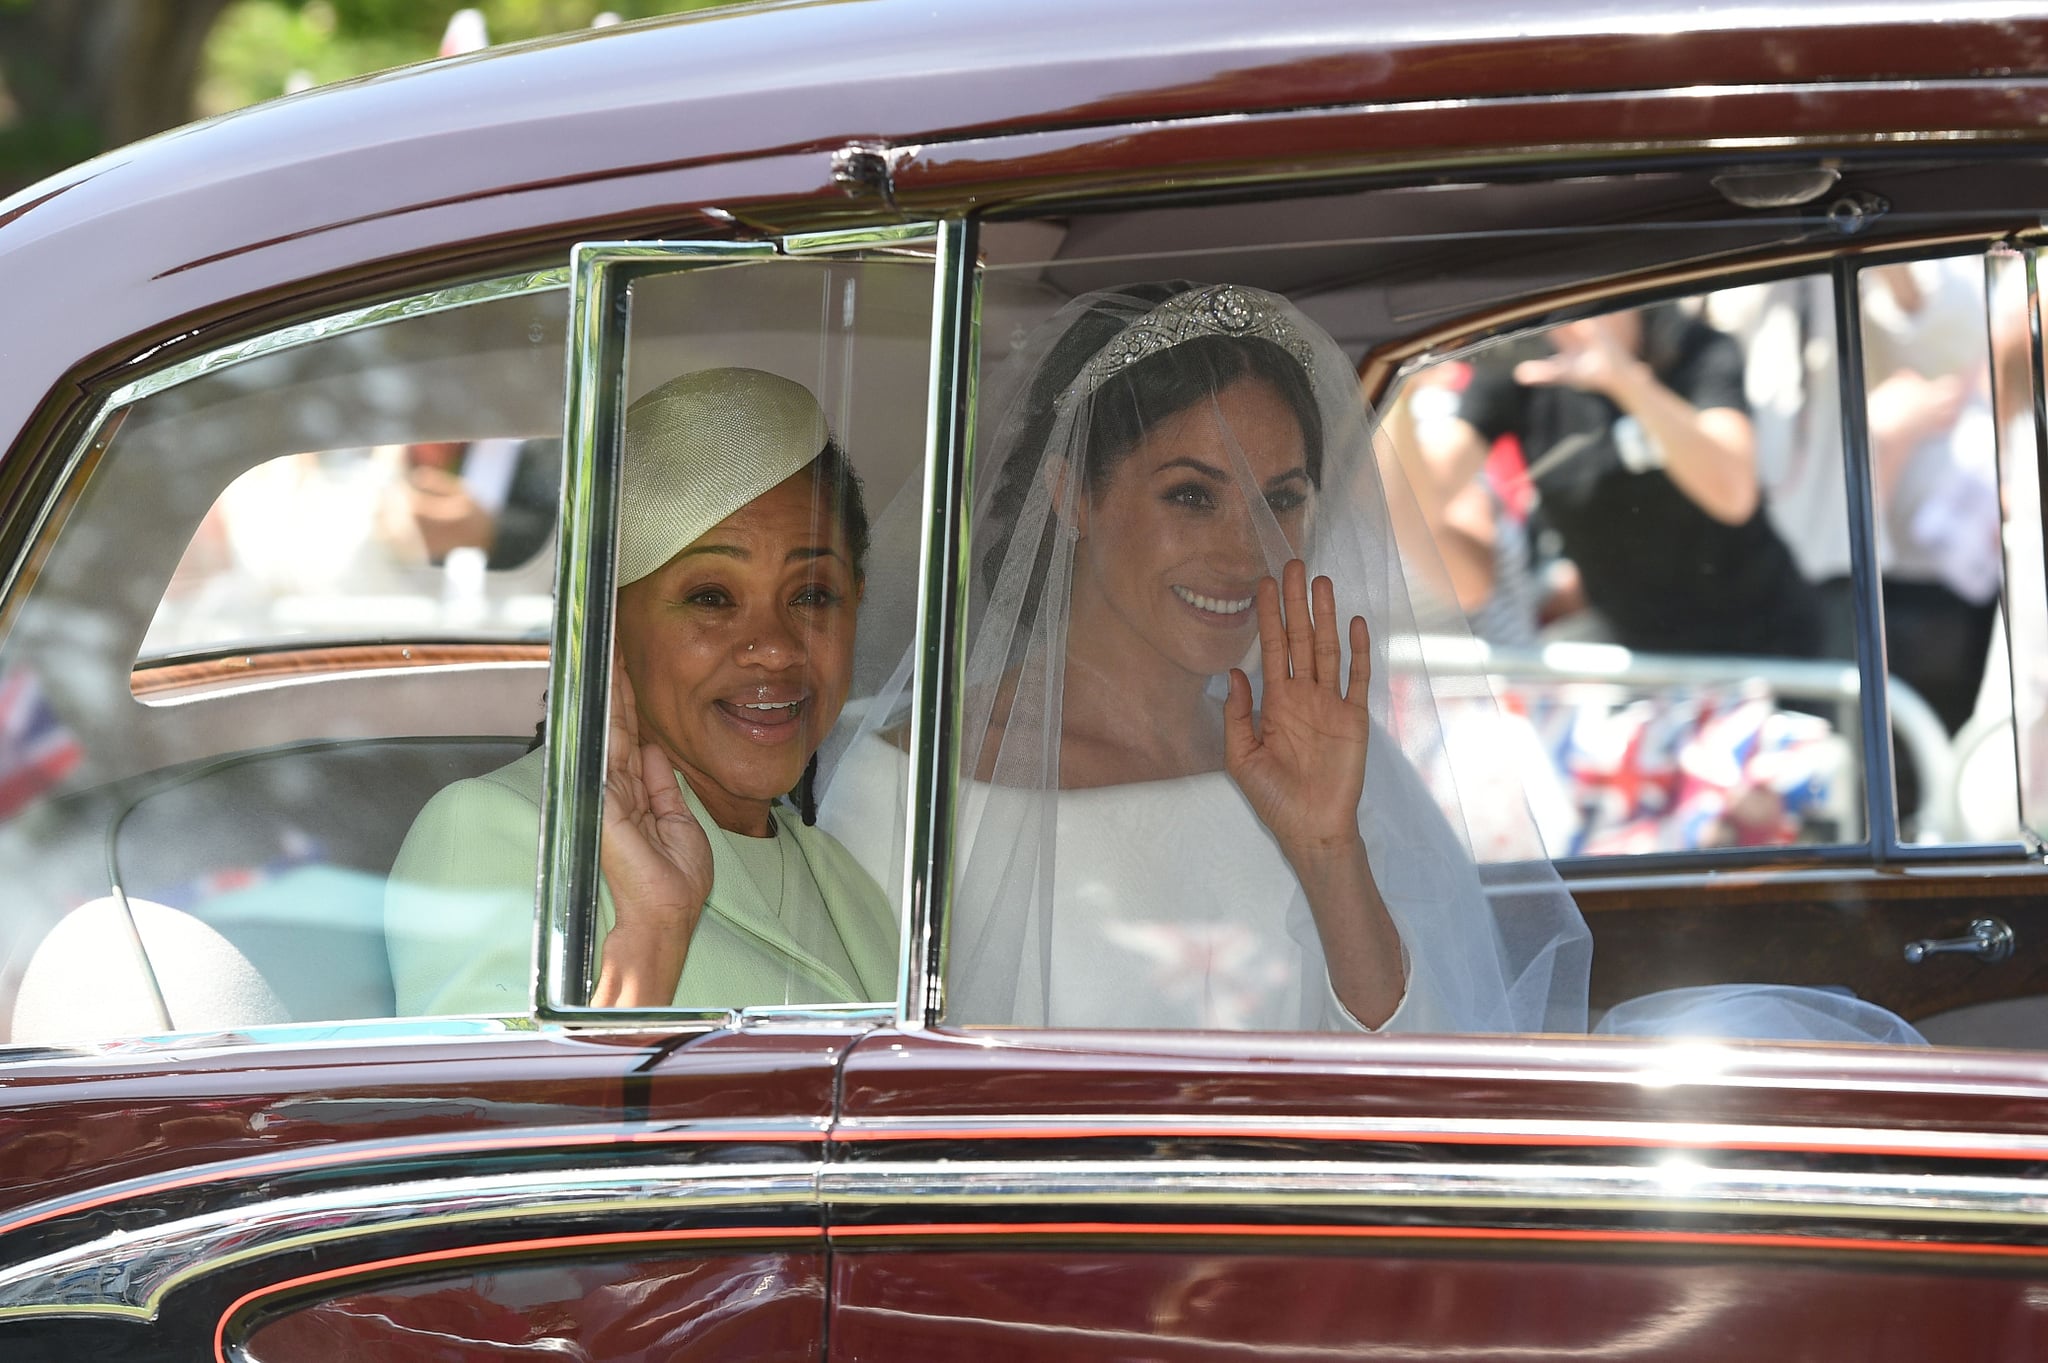 Meghan Markle (R) and her mother, Doria Ragland, arrive for her wedding ceremony to marry Britain's Prince Harry, Duke of Sussex, at St George's Chapel, Windsor Castle, in Windsor, on May 19, 2018. (Photo by Oli SCARFF / AFP)        (Photo credit should read OLI SCARFF/AFP/Getty Images)